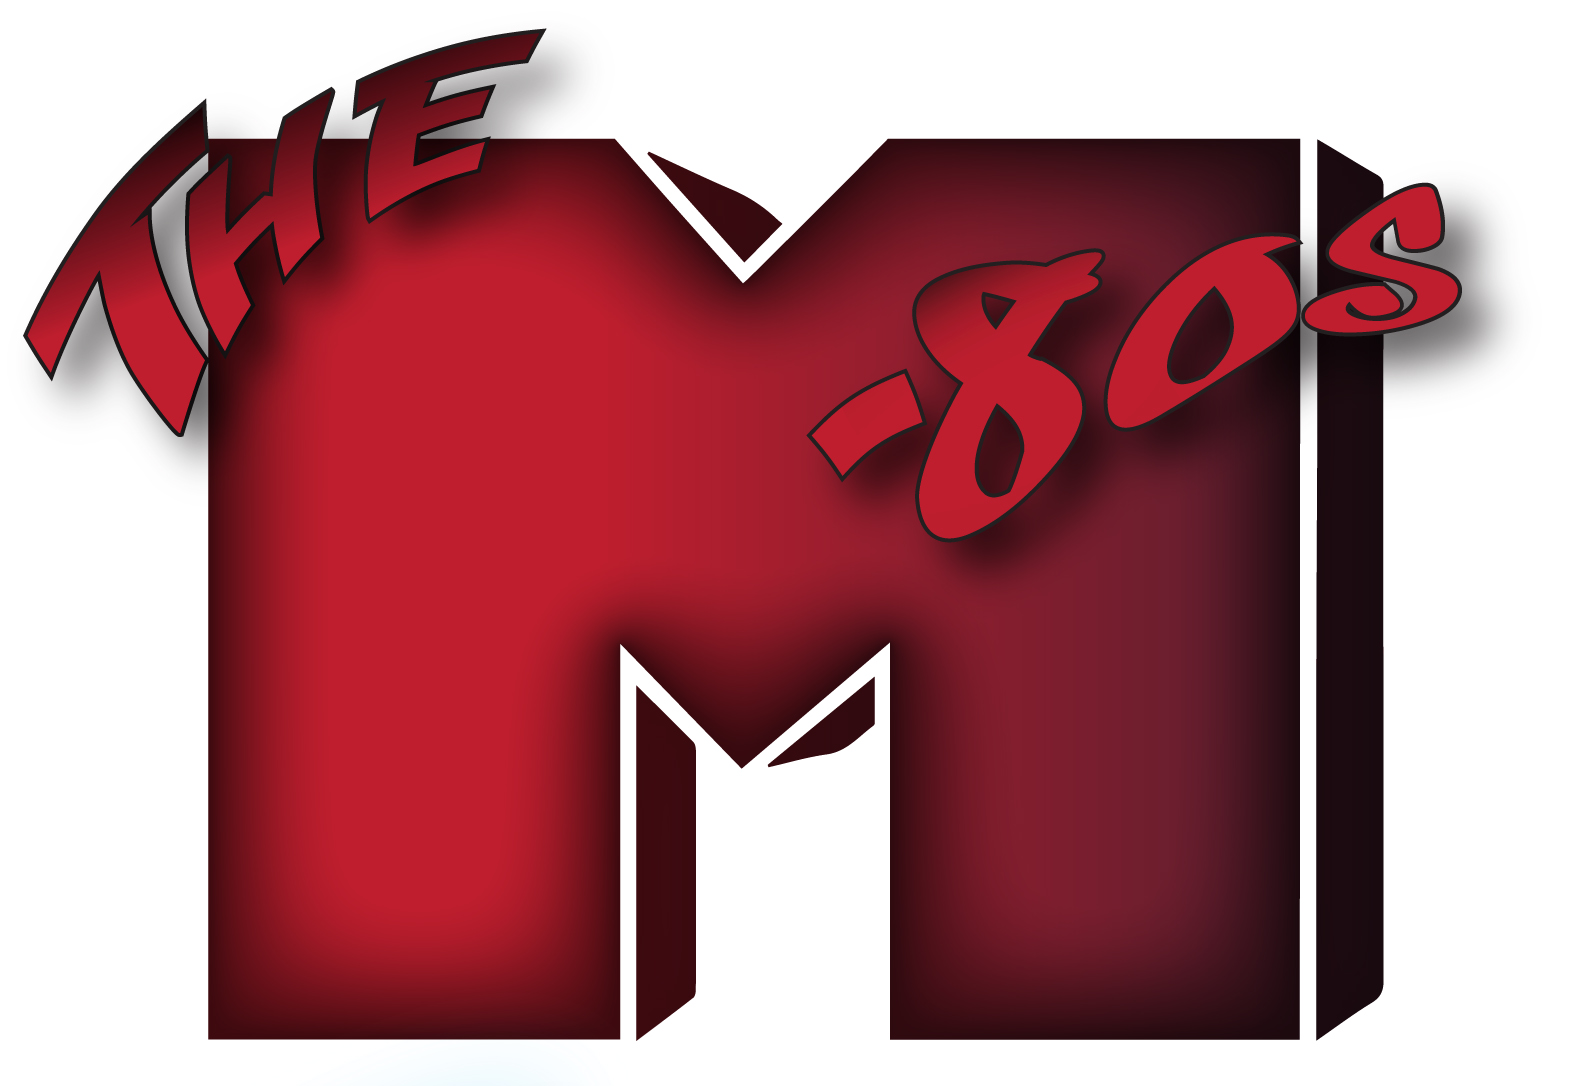 The M-80s